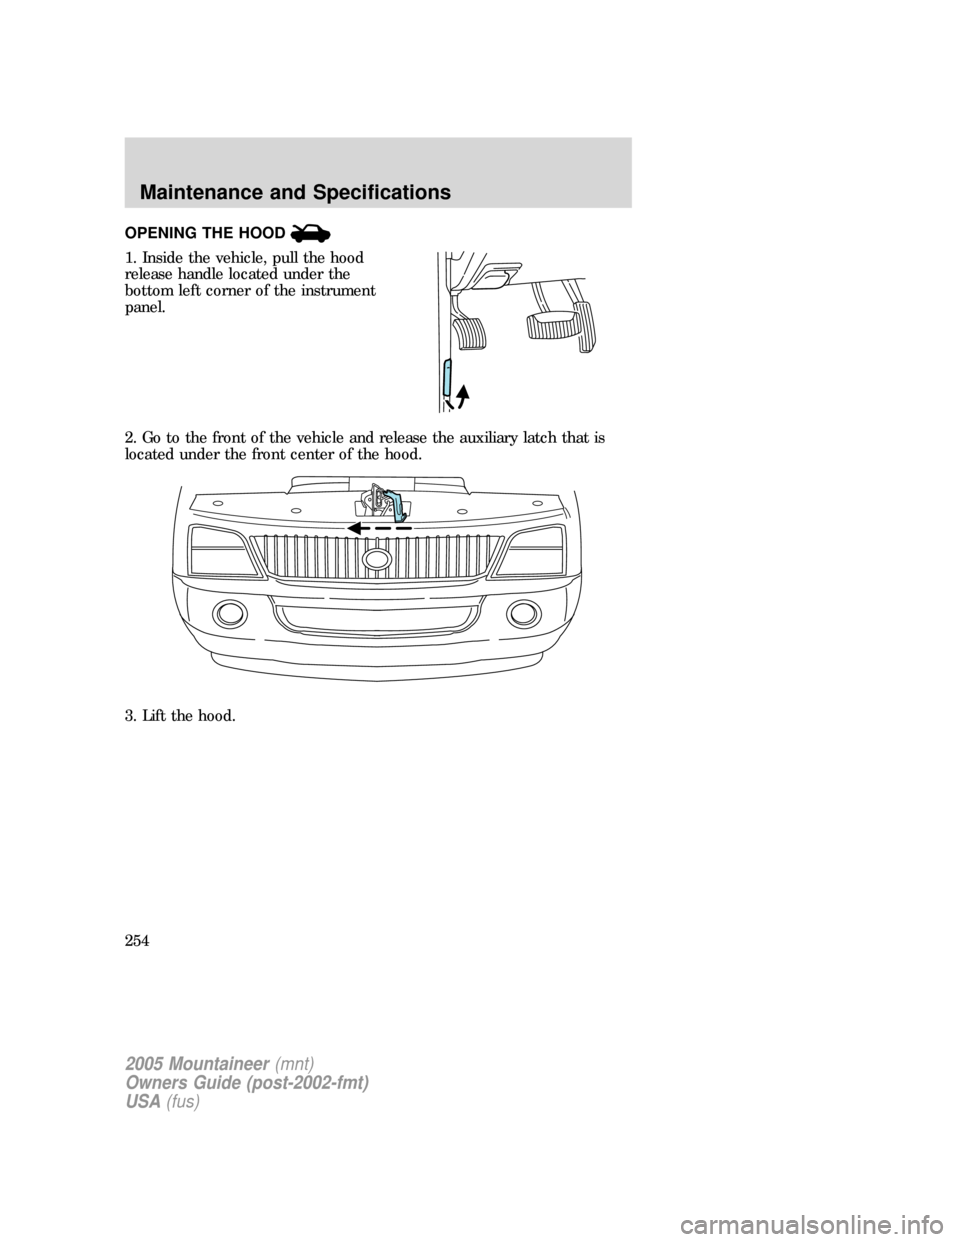 Mercury Mountaineer 2005  Owners Manuals OPENING THE HOOD
1. Inside the vehicle, pull the hood
release handle located under the
bottom left corner of the instrument
panel.
2. Go to the front of the vehicle and release the auxiliary latch tha